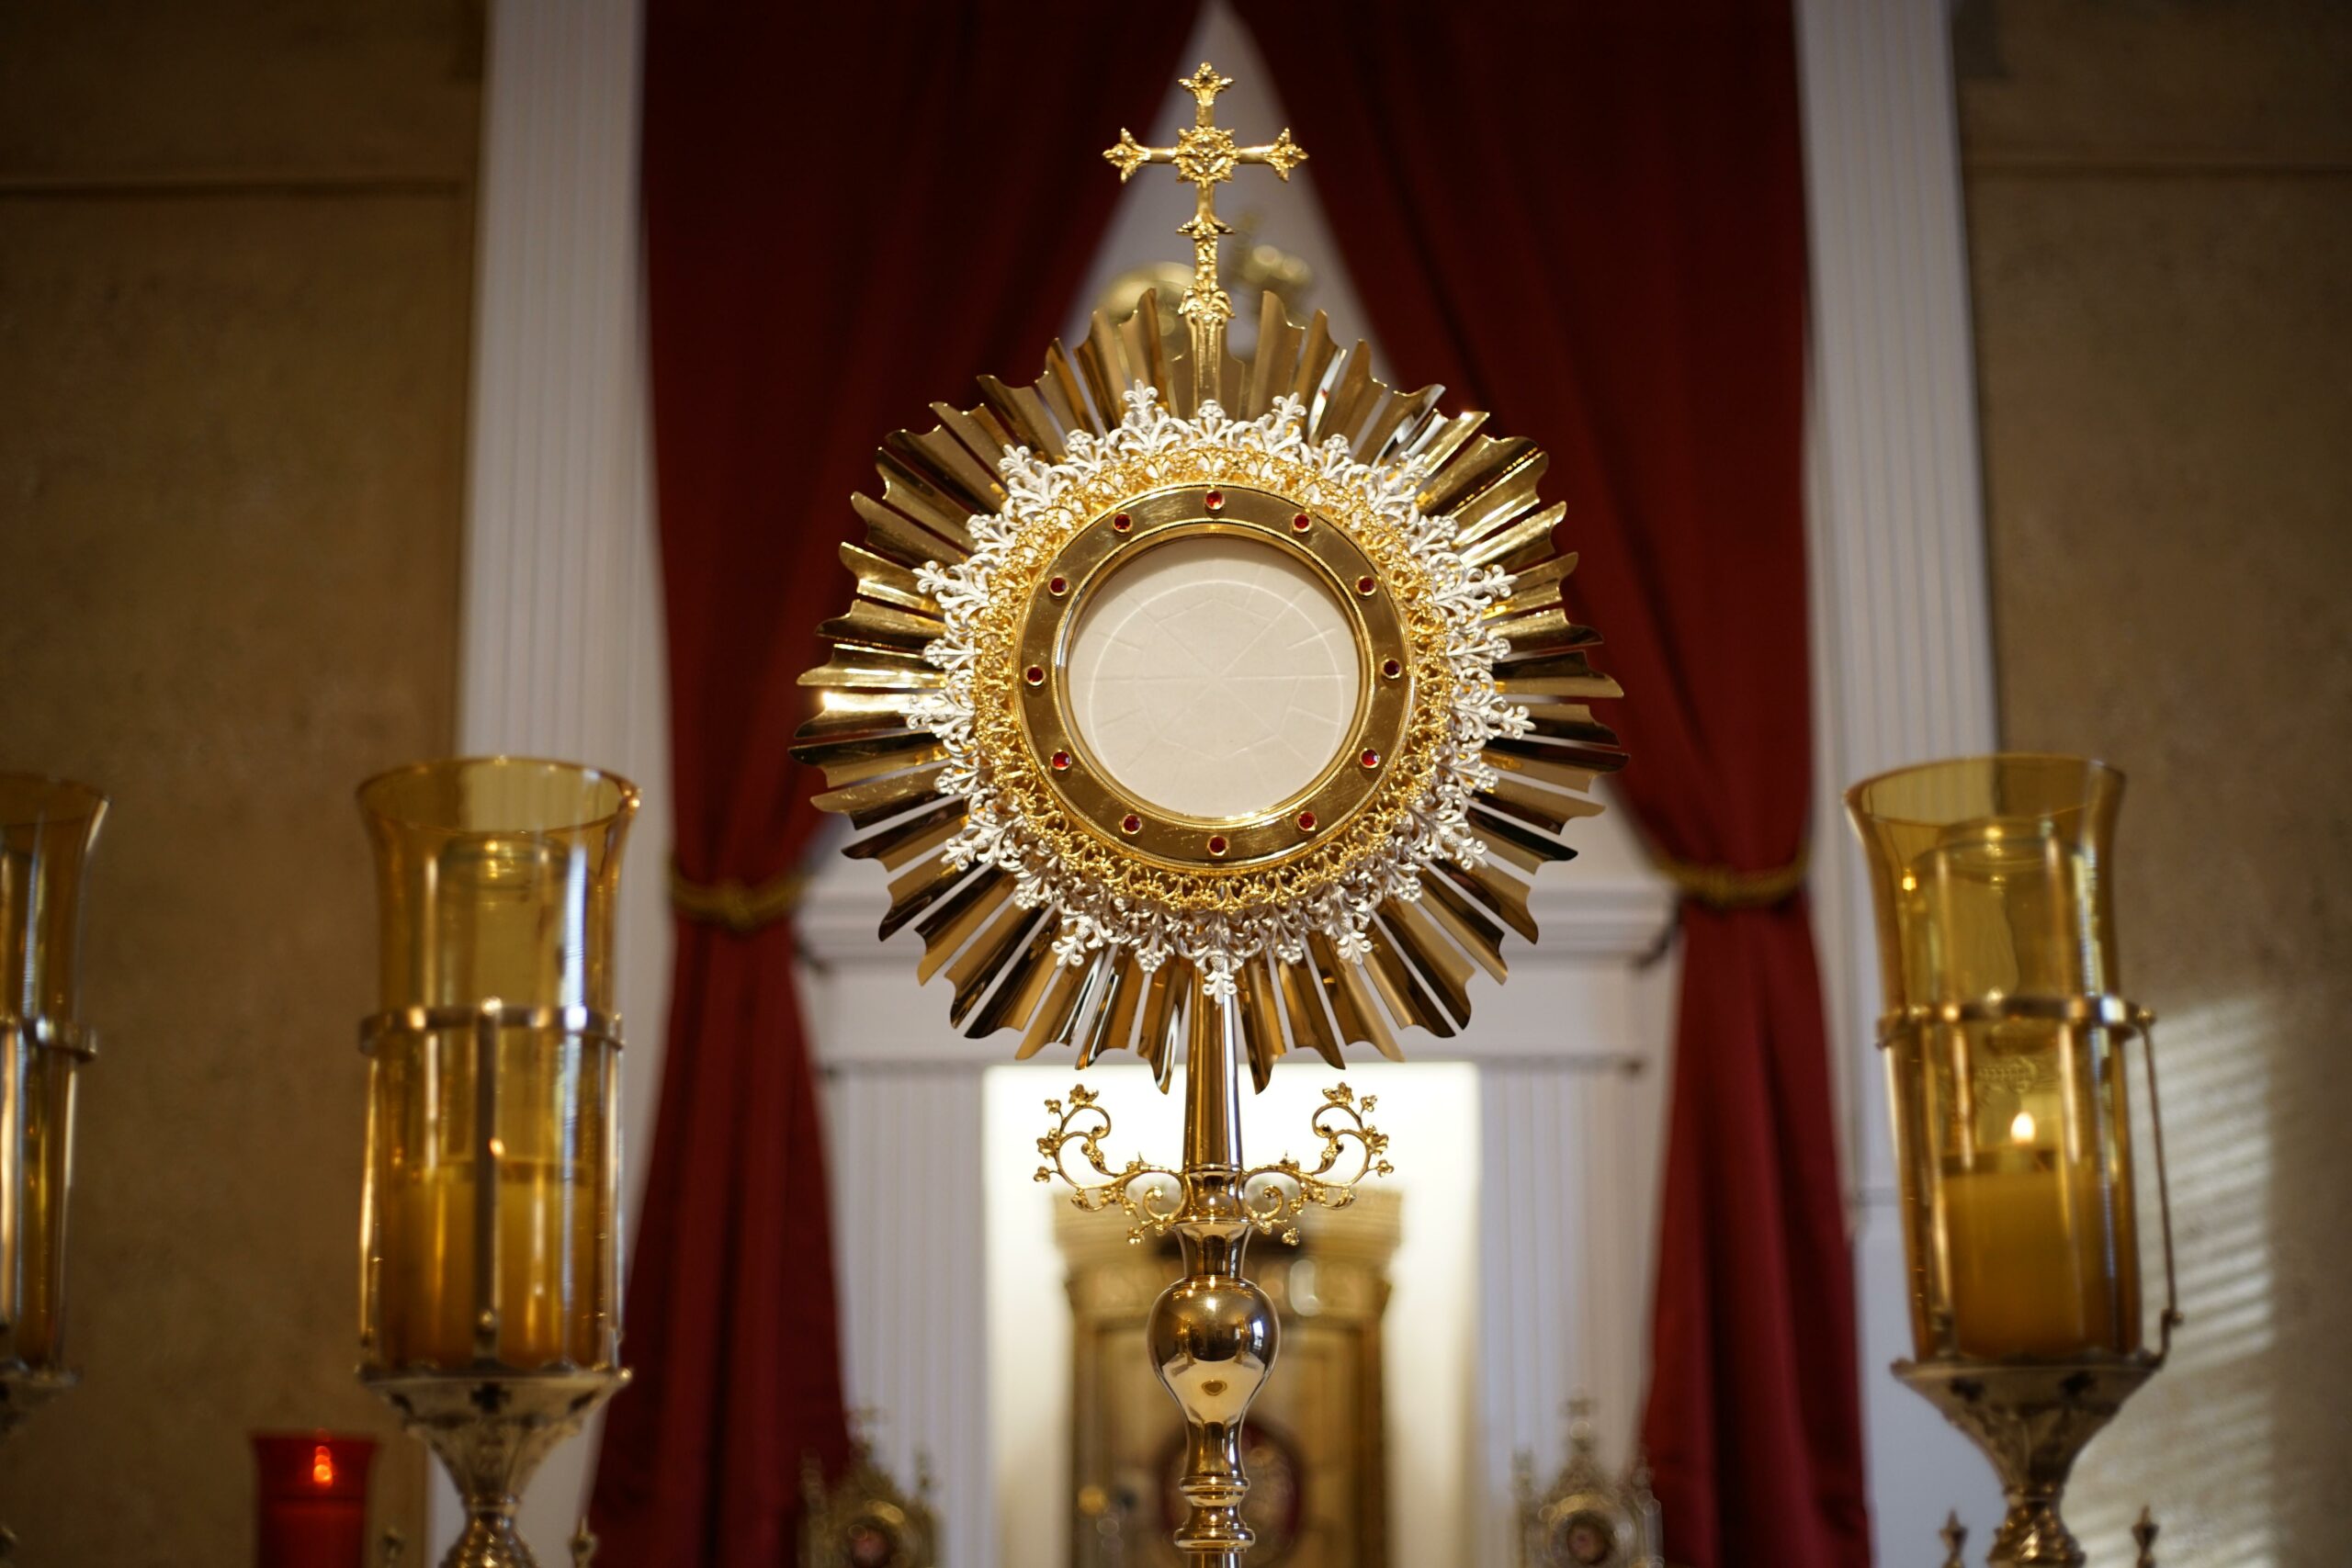 religious significance of the eucharist in the catholic church